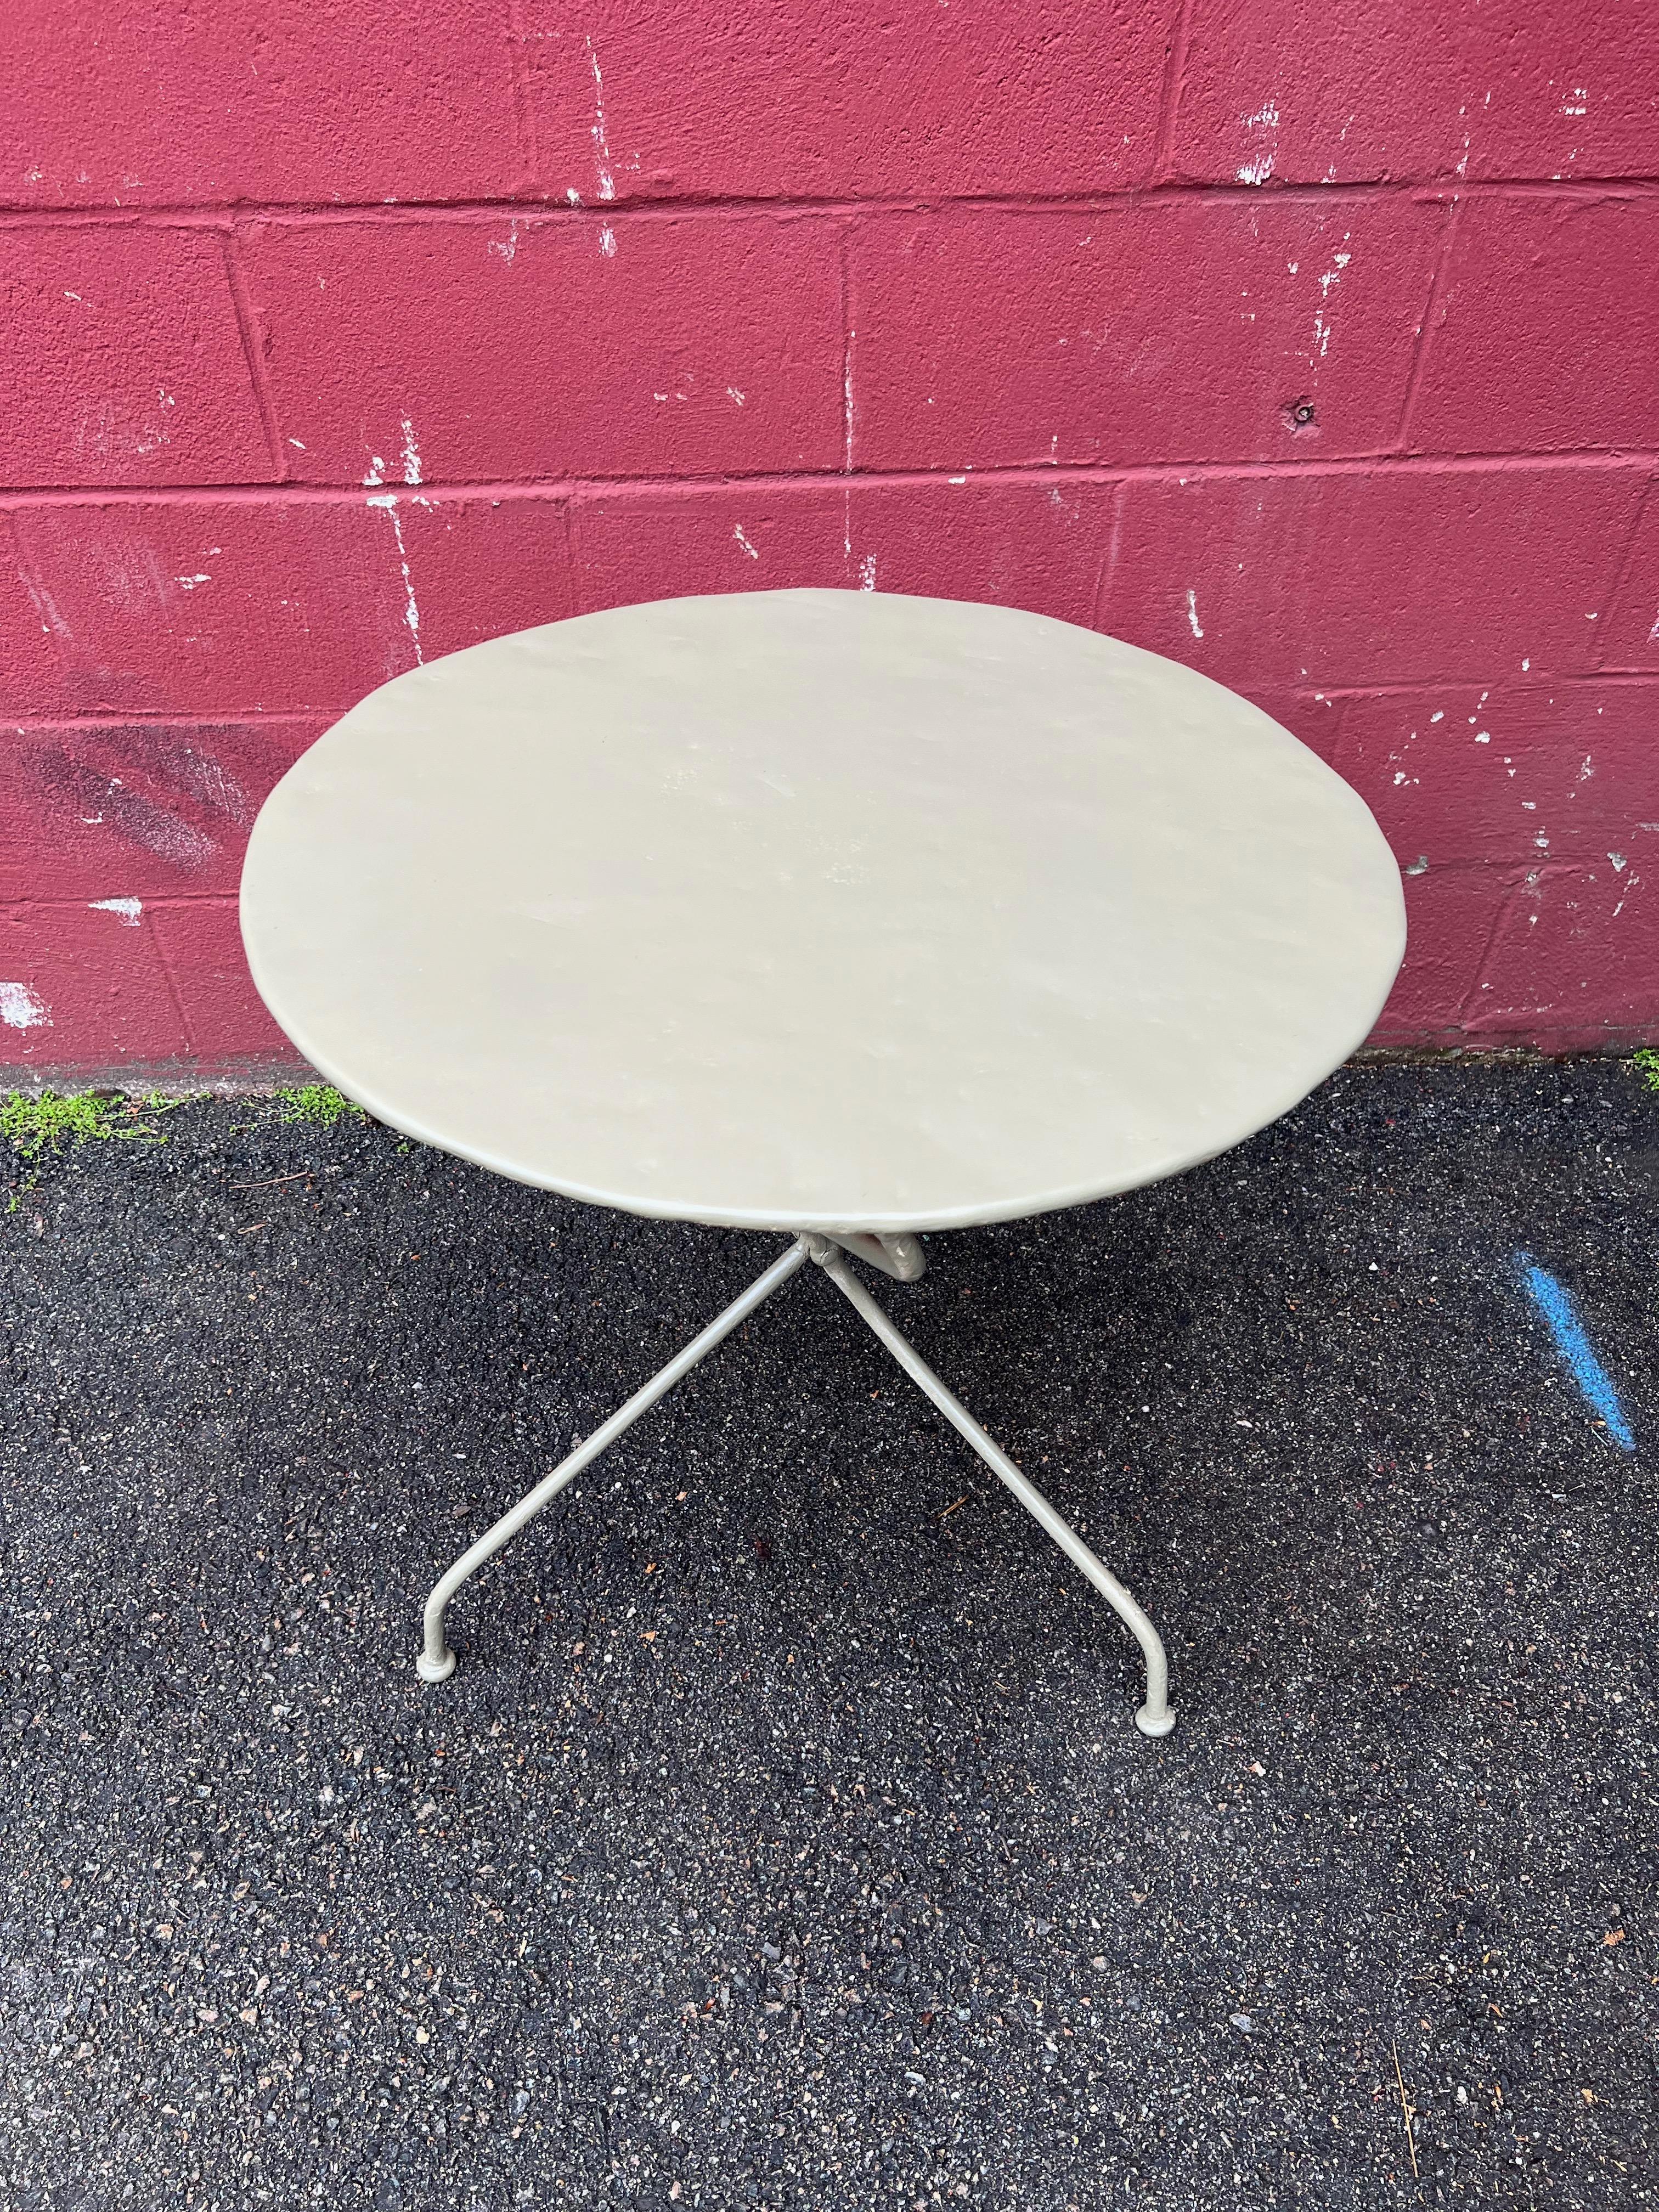 painted folding table